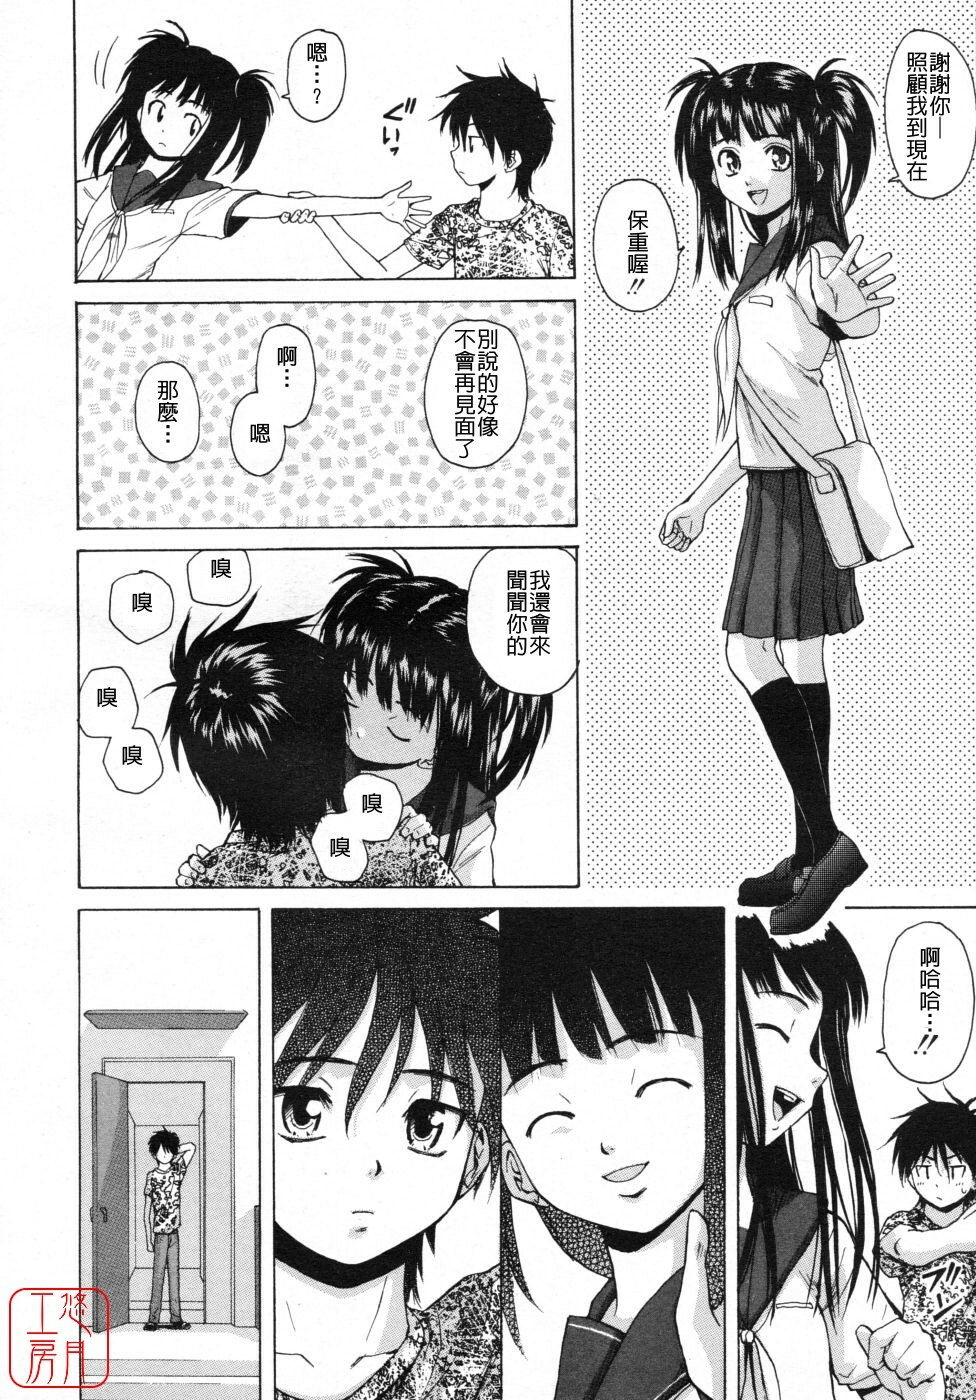 [Fuuga] Girl Friend 2 (Chinese) page 12 full